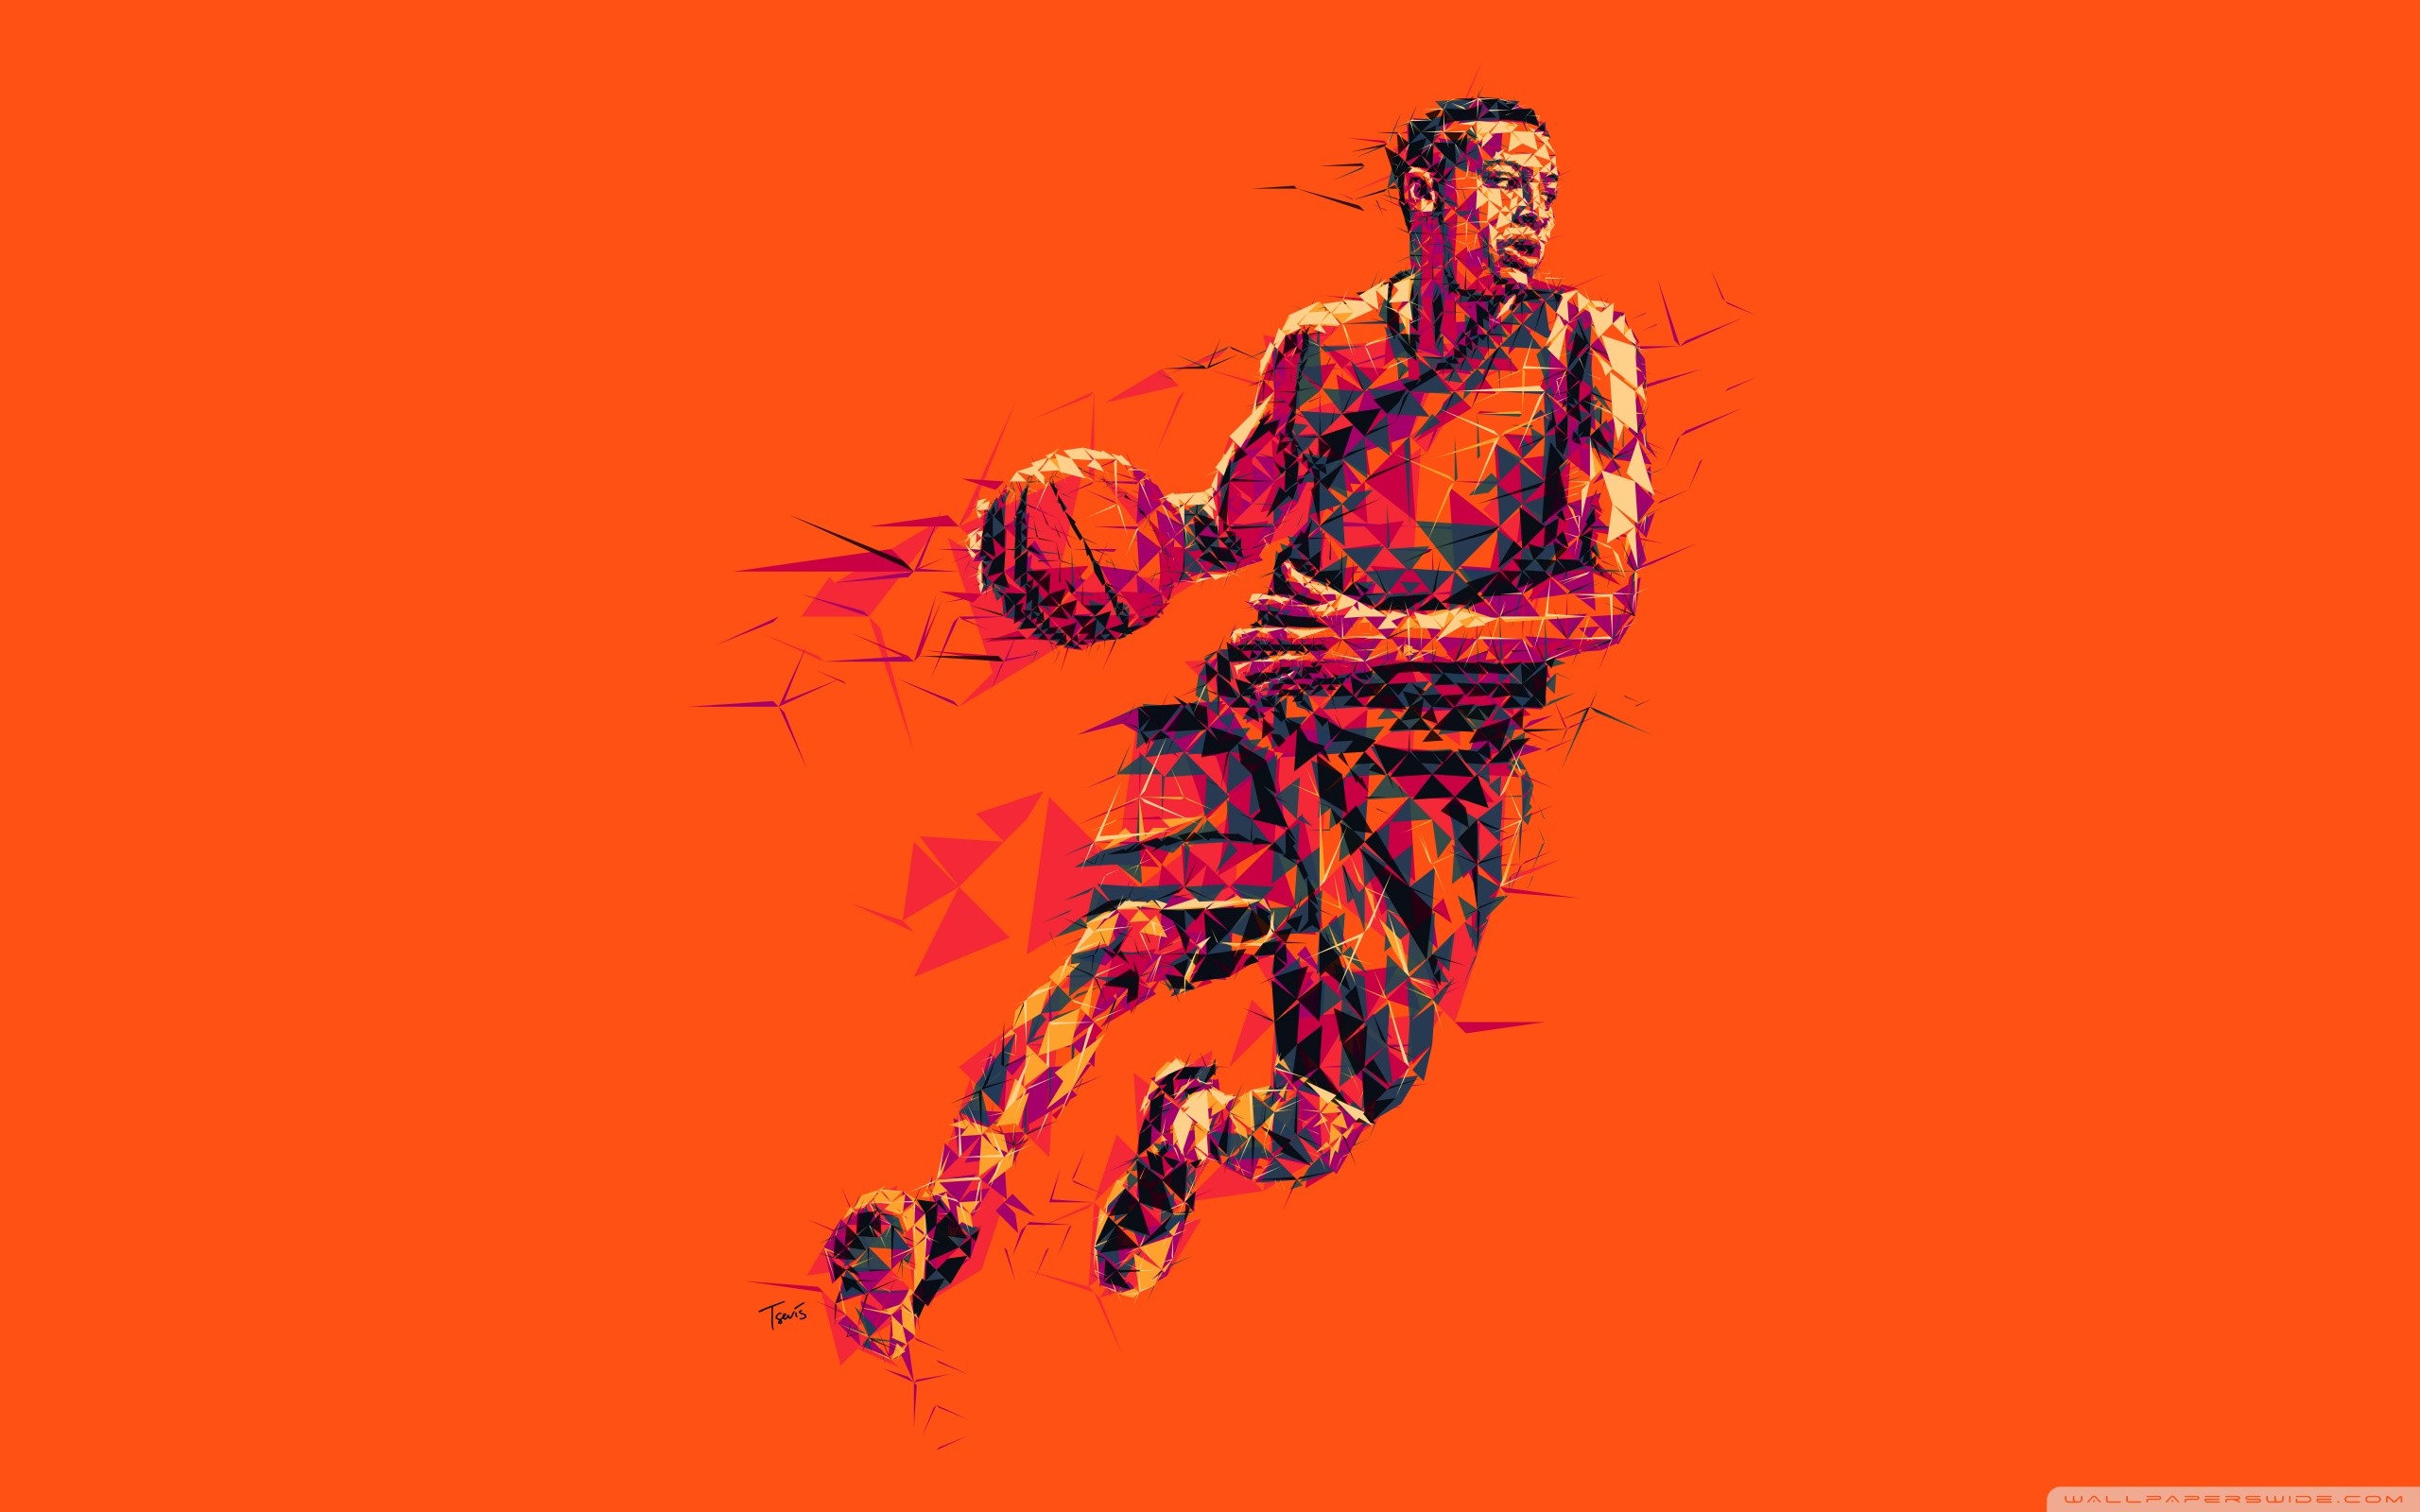 2560x1600 ... Collection of Basketball Hd Backgrounds on Spyder Wallpapers ...